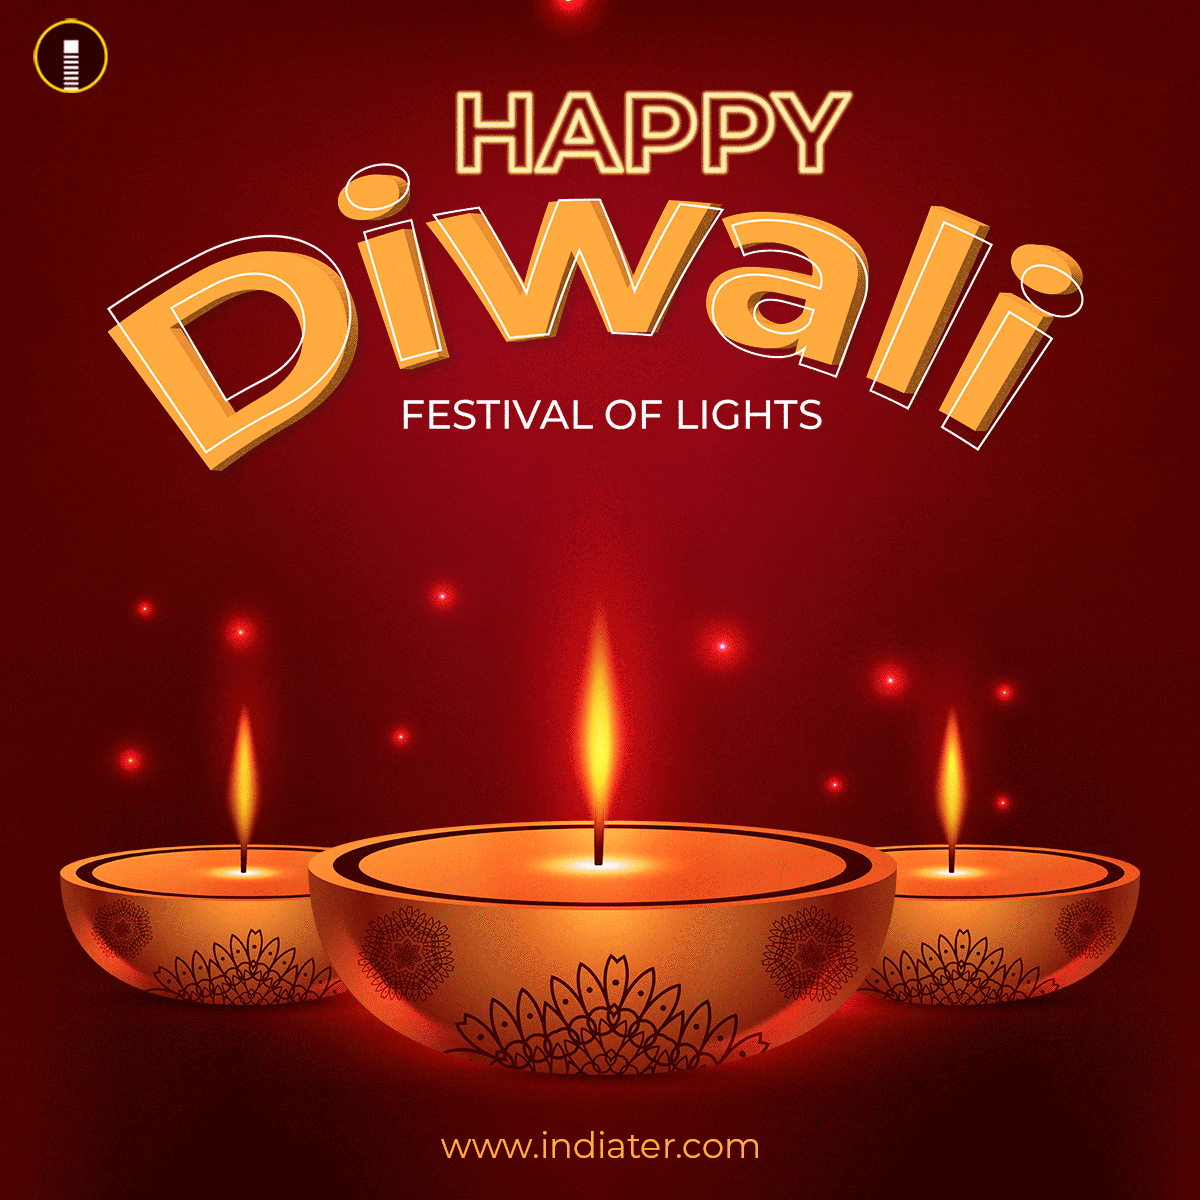 “4K Full Collection of Over 999 Happy Diwali Images for Download – Incredible Selection for Happy Diwali Images”